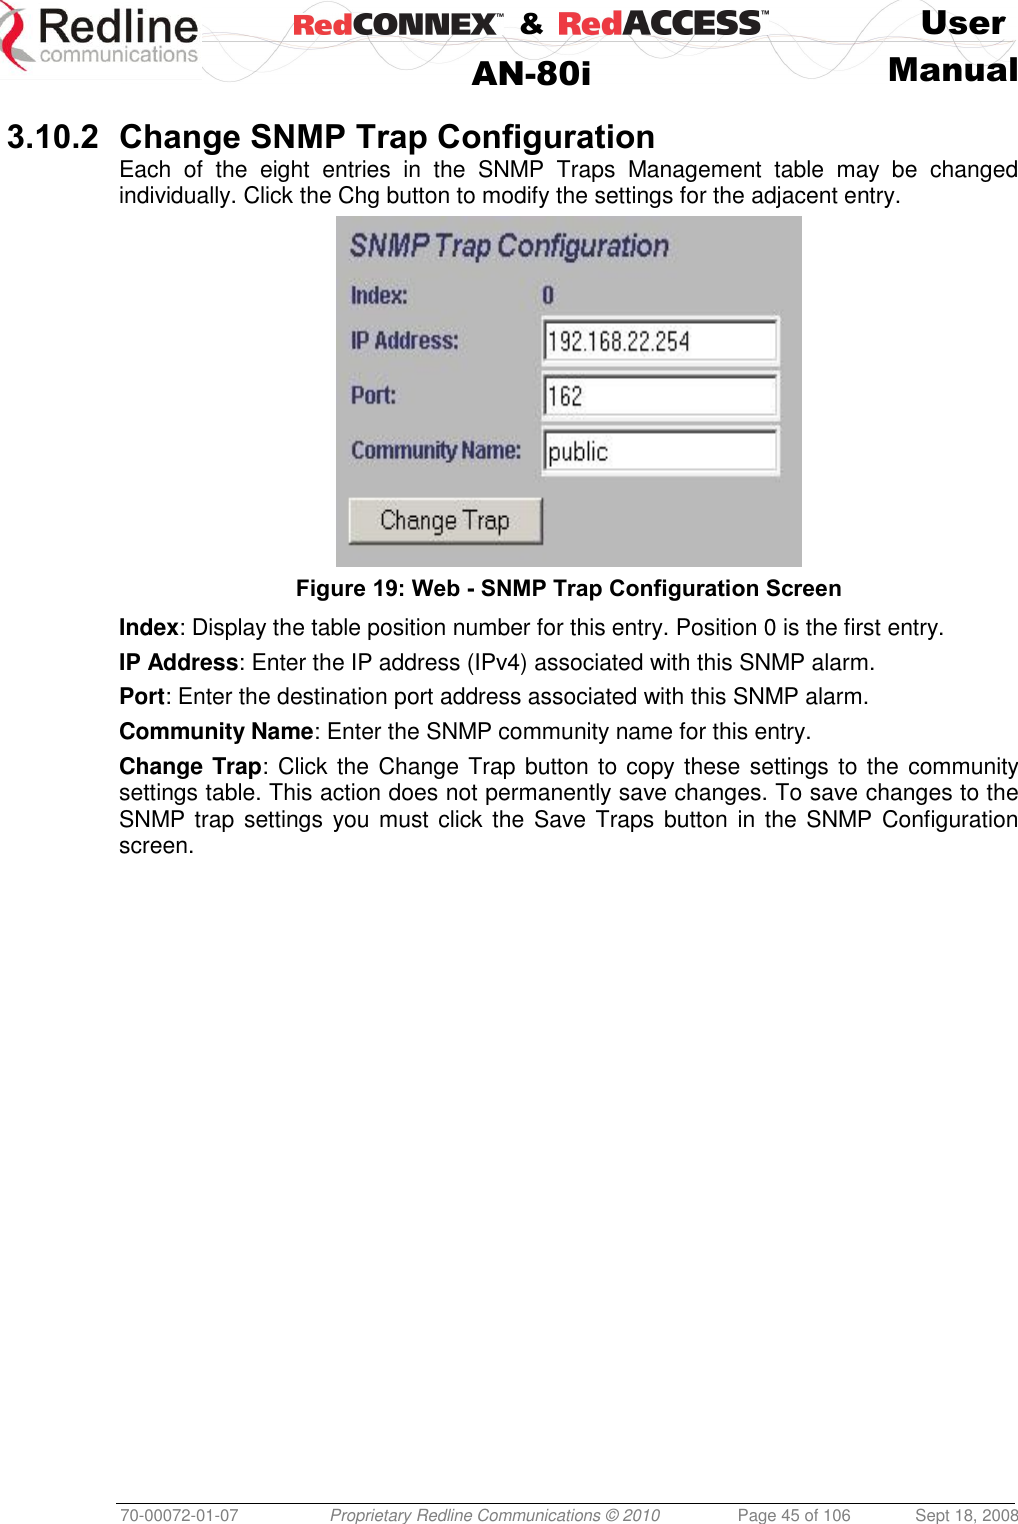    &amp;  User  AN-80i Manual  70-00072-01-07 Proprietary Redline Communications © 2010  Page 45 of 106  Sept 18, 2008  3.10.2 Change SNMP Trap Configuration Each  of  the  eight  entries  in  the  SNMP  Traps  Management  table  may  be  changed individually. Click the Chg button to modify the settings for the adjacent entry.  Figure 19: Web - SNMP Trap Configuration Screen  Index: Display the table position number for this entry. Position 0 is the first entry. IP Address: Enter the IP address (IPv4) associated with this SNMP alarm. Port: Enter the destination port address associated with this SNMP alarm. Community Name: Enter the SNMP community name for this entry. Change Trap: Click the Change Trap button to copy these settings to the community settings table. This action does not permanently save changes. To save changes to the SNMP trap settings  you must click the Save Traps button in the SNMP Configuration screen. 